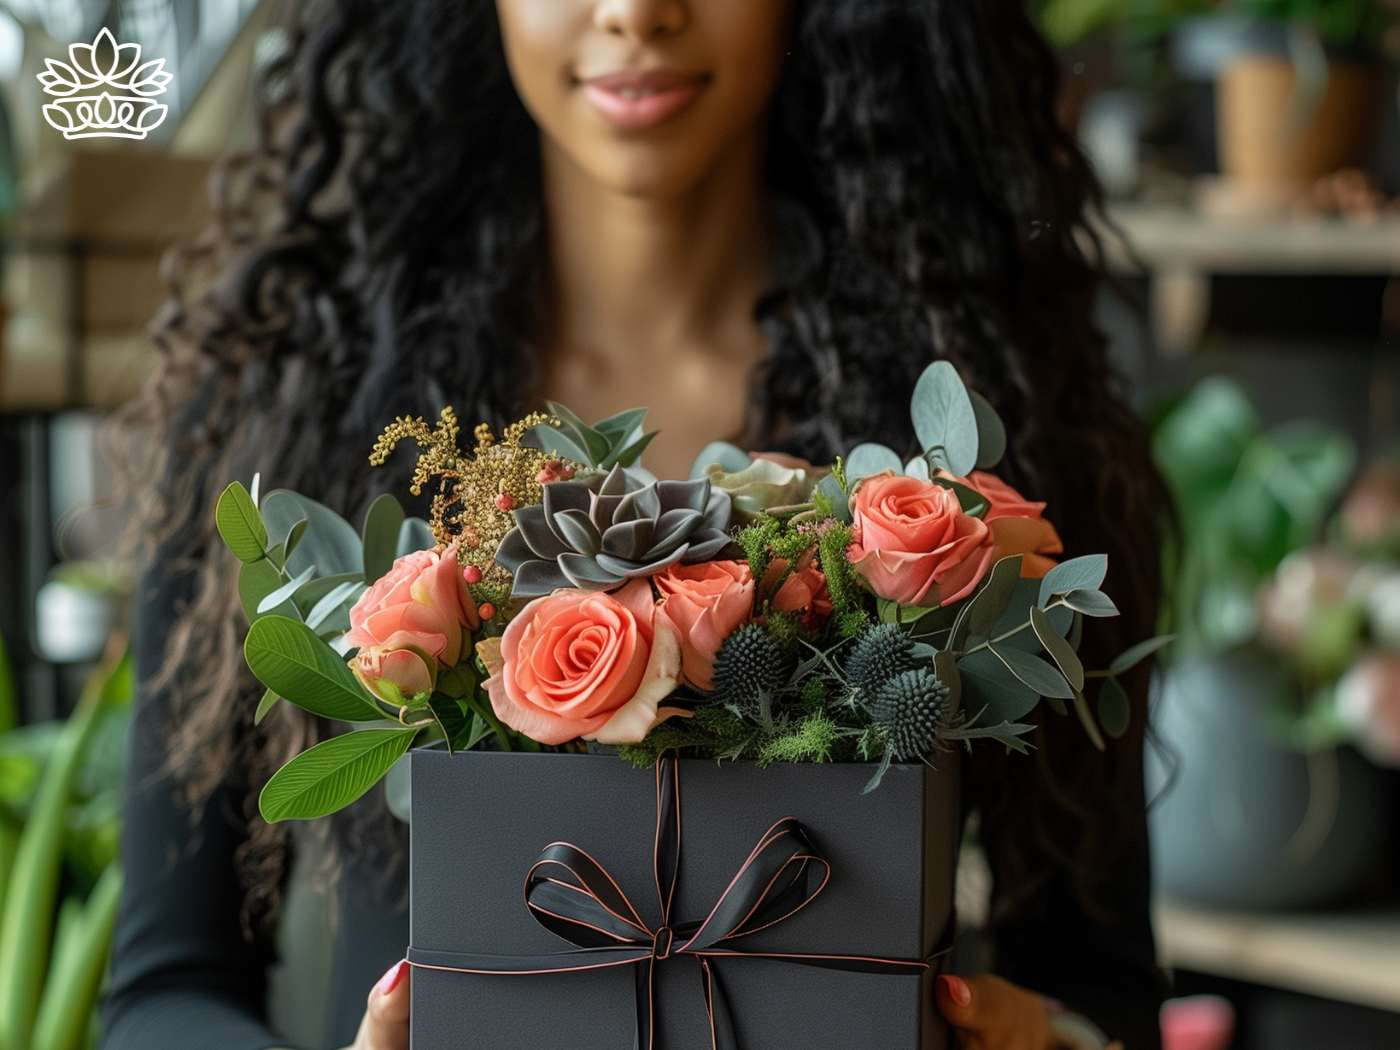 Woman presenting a luxurious gift box with a sophisticated arrangement of roses and succulents, from the Congratulations Gift Boxes Collection for your occasion by Fabulous Flowers and Gifts.